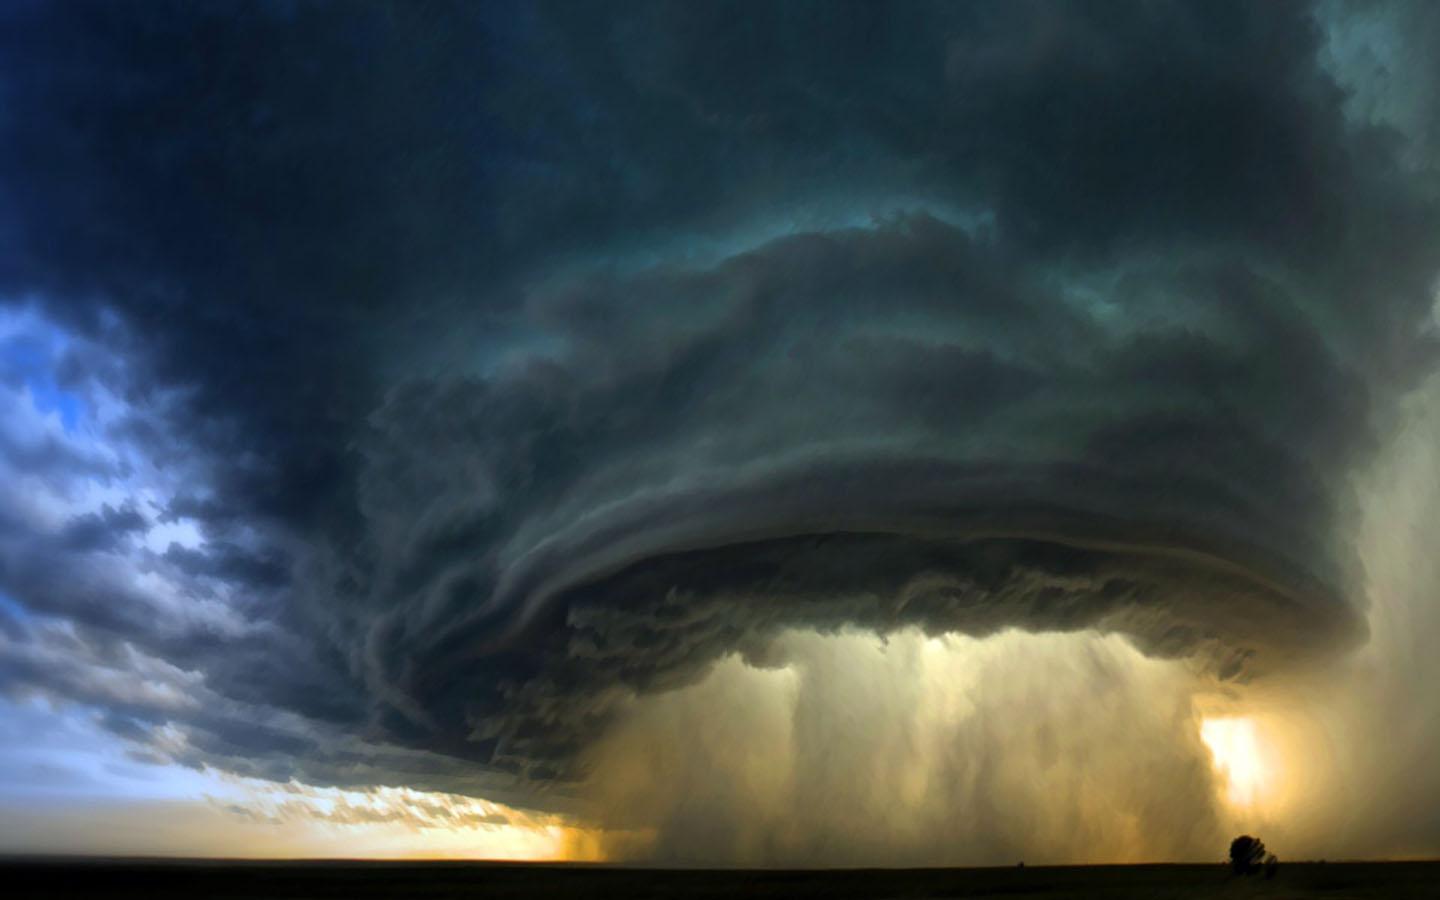 Thunderstorm HD wallpaper - Android Apps on Google Play